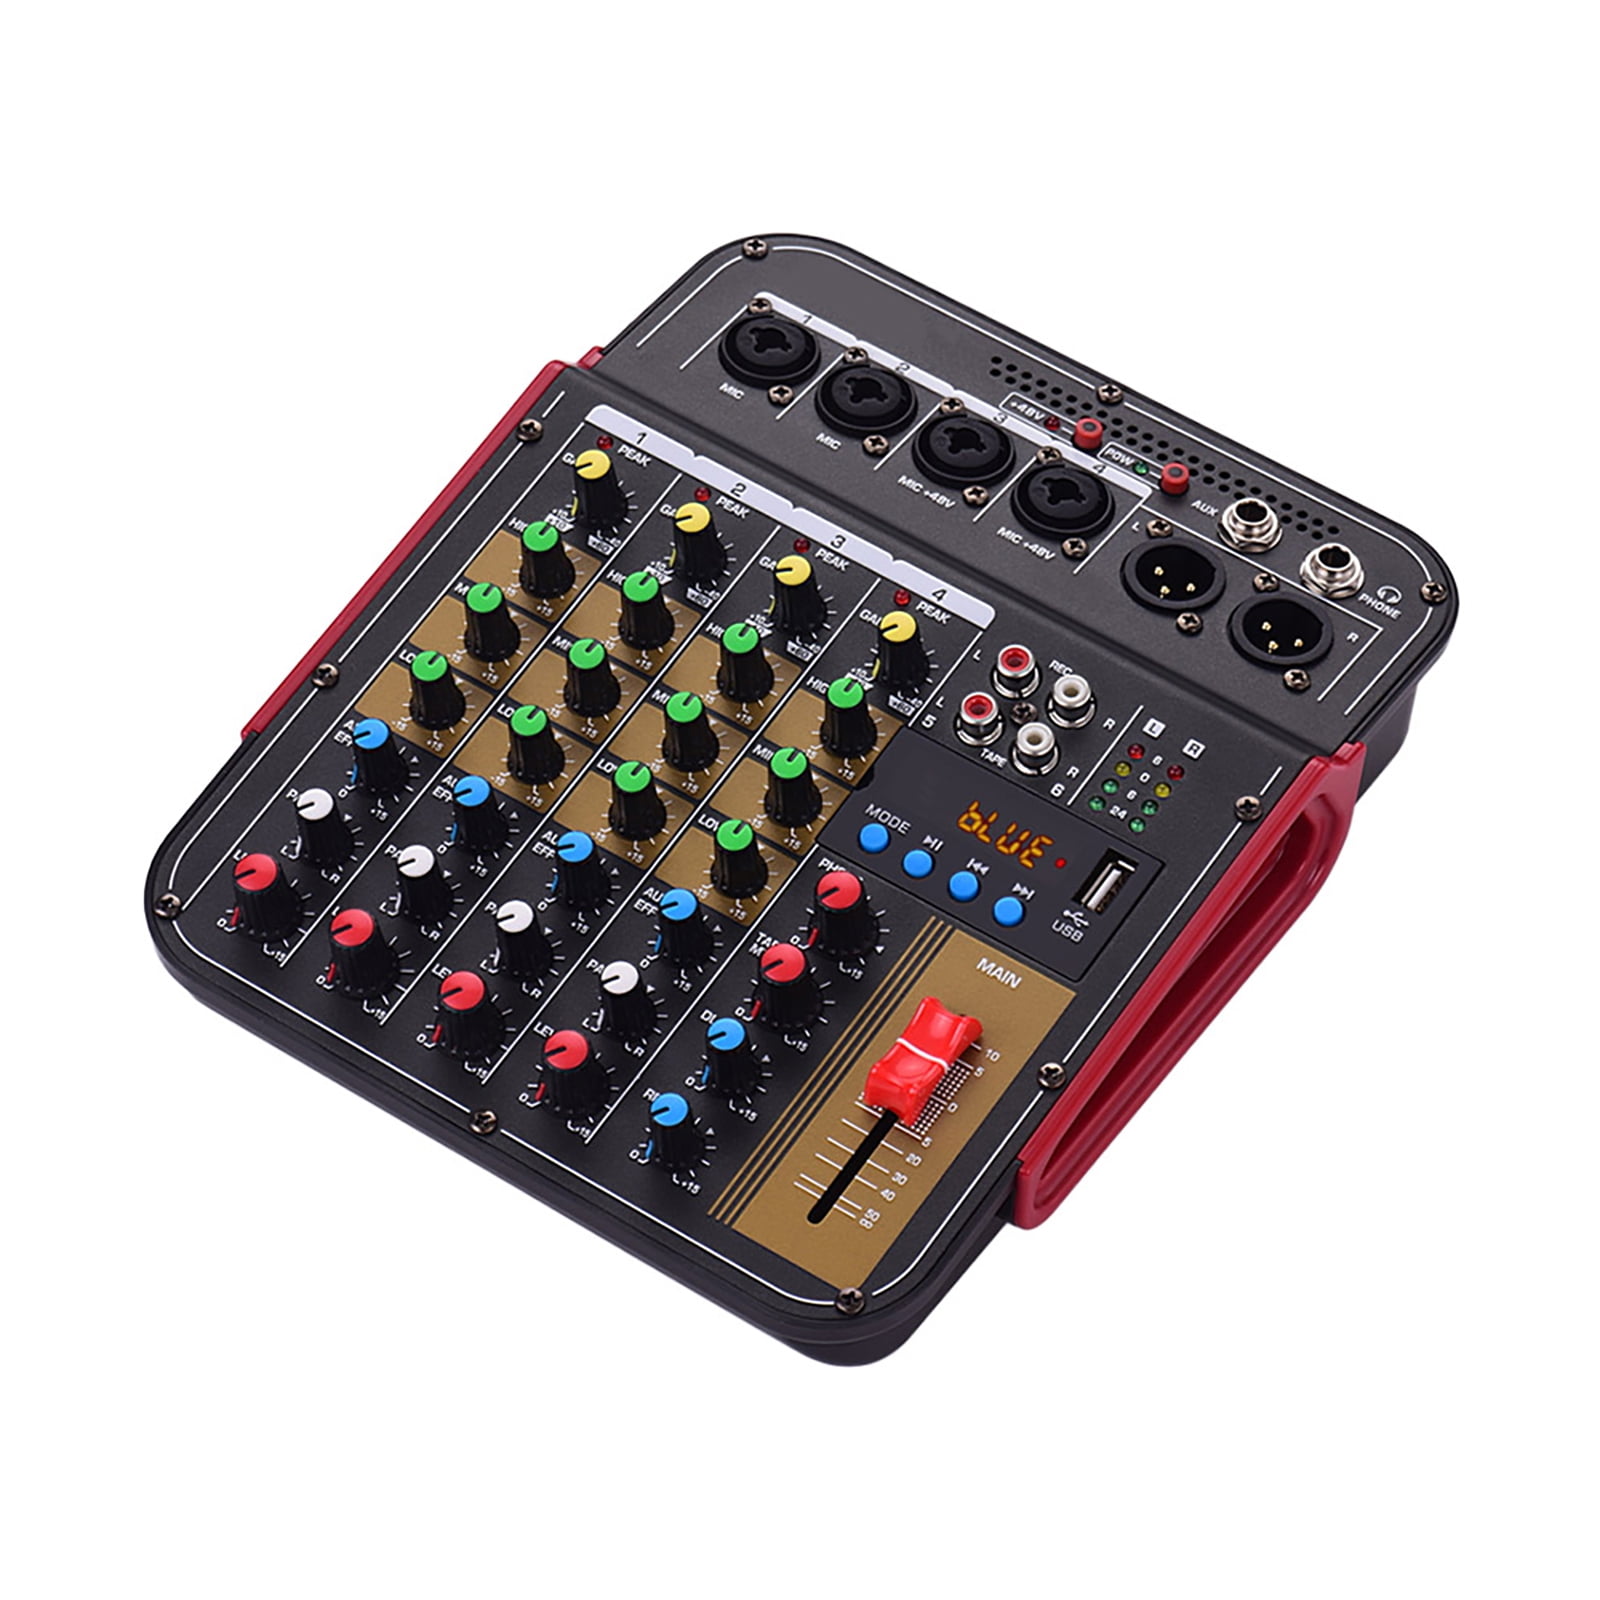 Muslady SM-68 6-Channel Sound Card Mixing Console Mixer Built-in 16 Effects with USB Audio Interface Supports 5V Power Bank for Recording DJ Network Live Broadcast Karaoke 